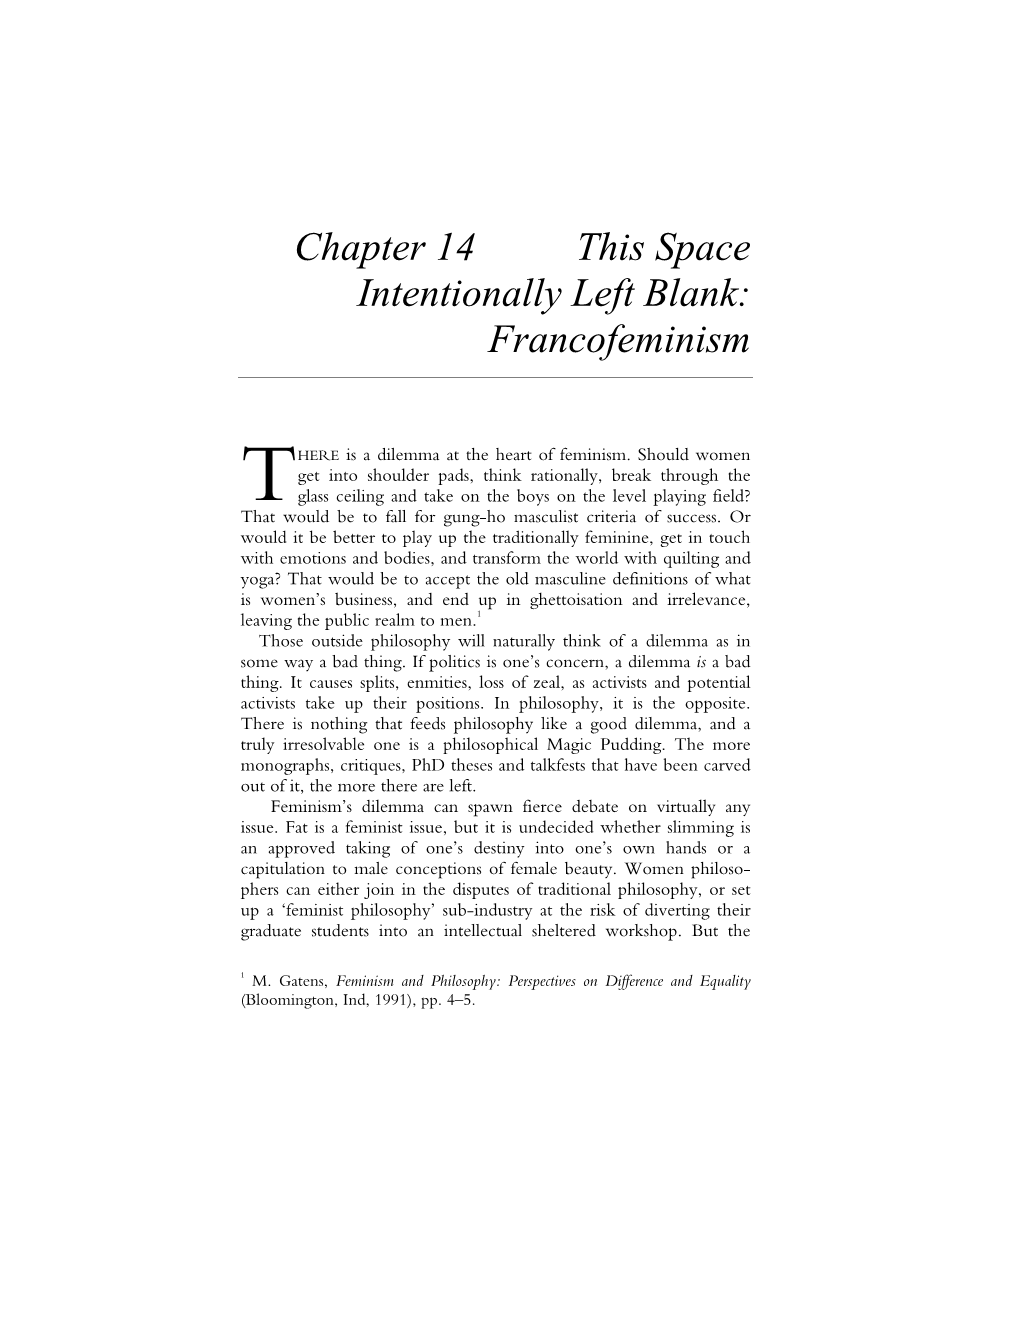 Chapter 14 This Space Intentionally Left Blank: Francofeminism